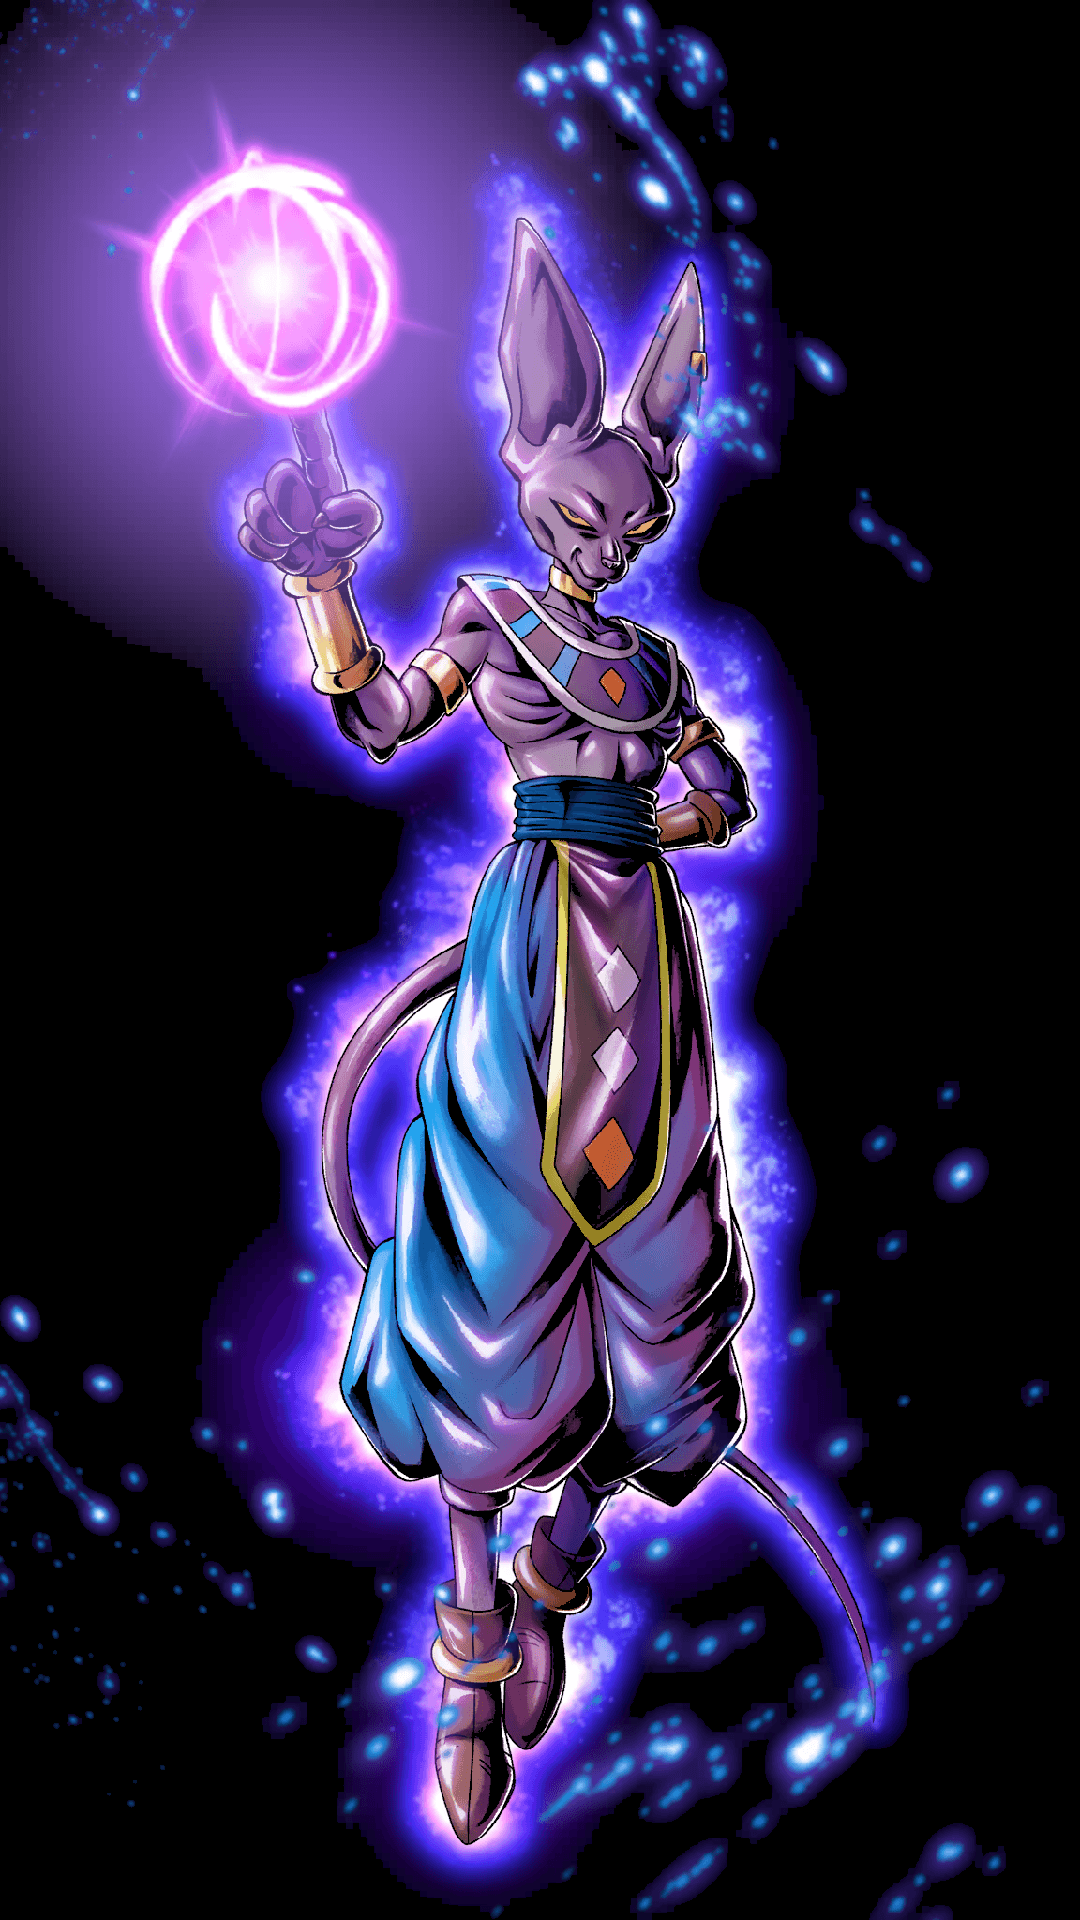 Beerus Wallpaper for iPhone and Android